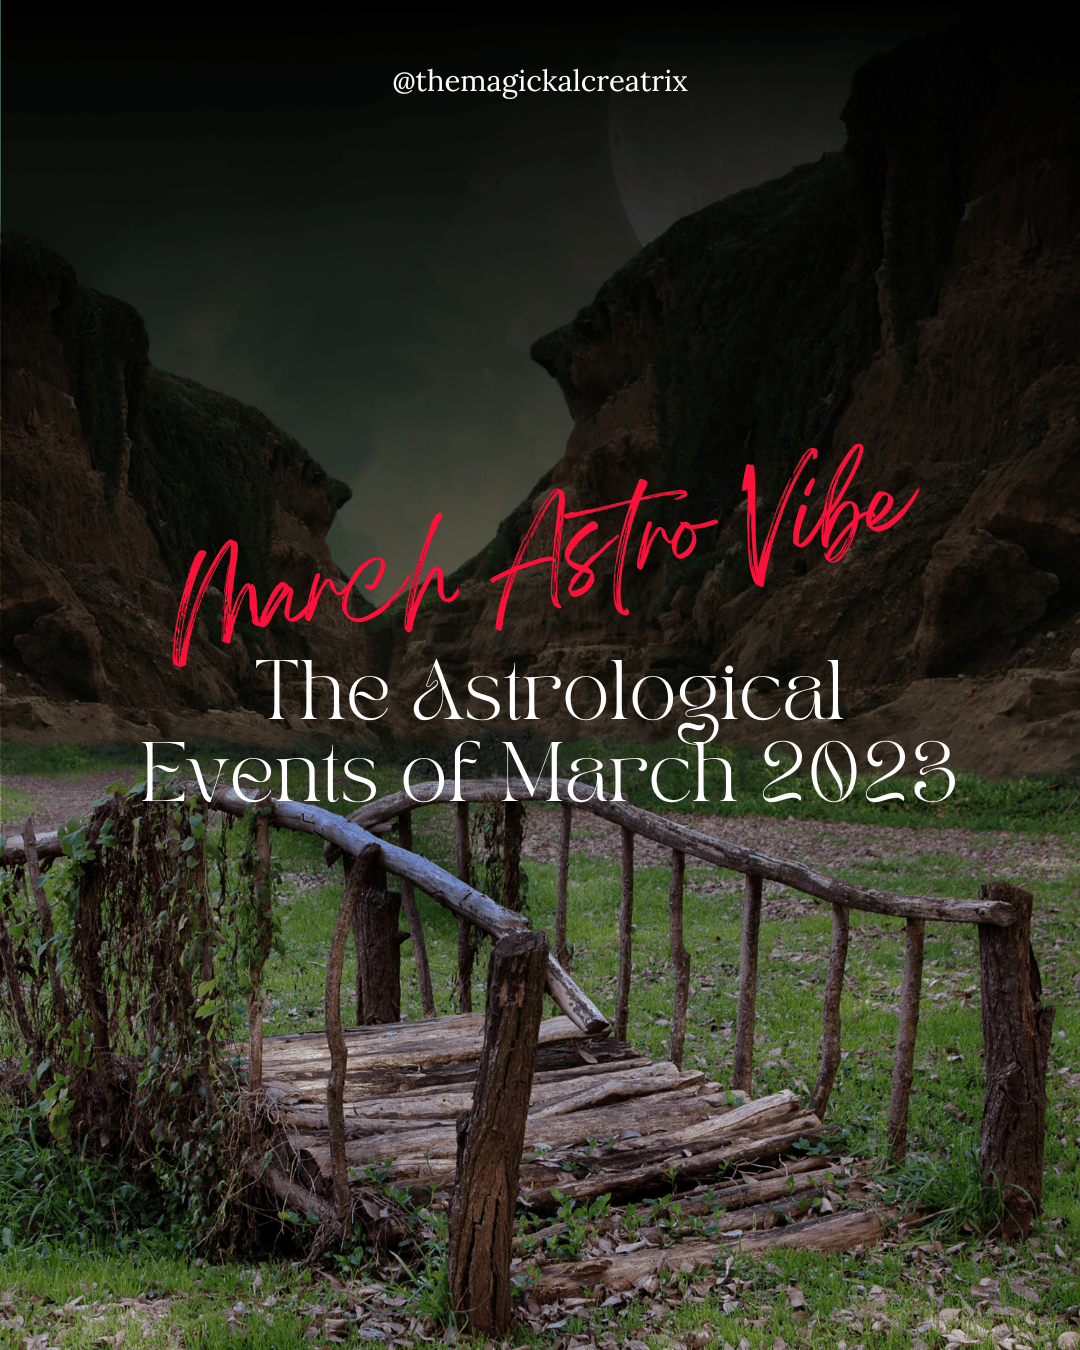 The Astrology of March 2023